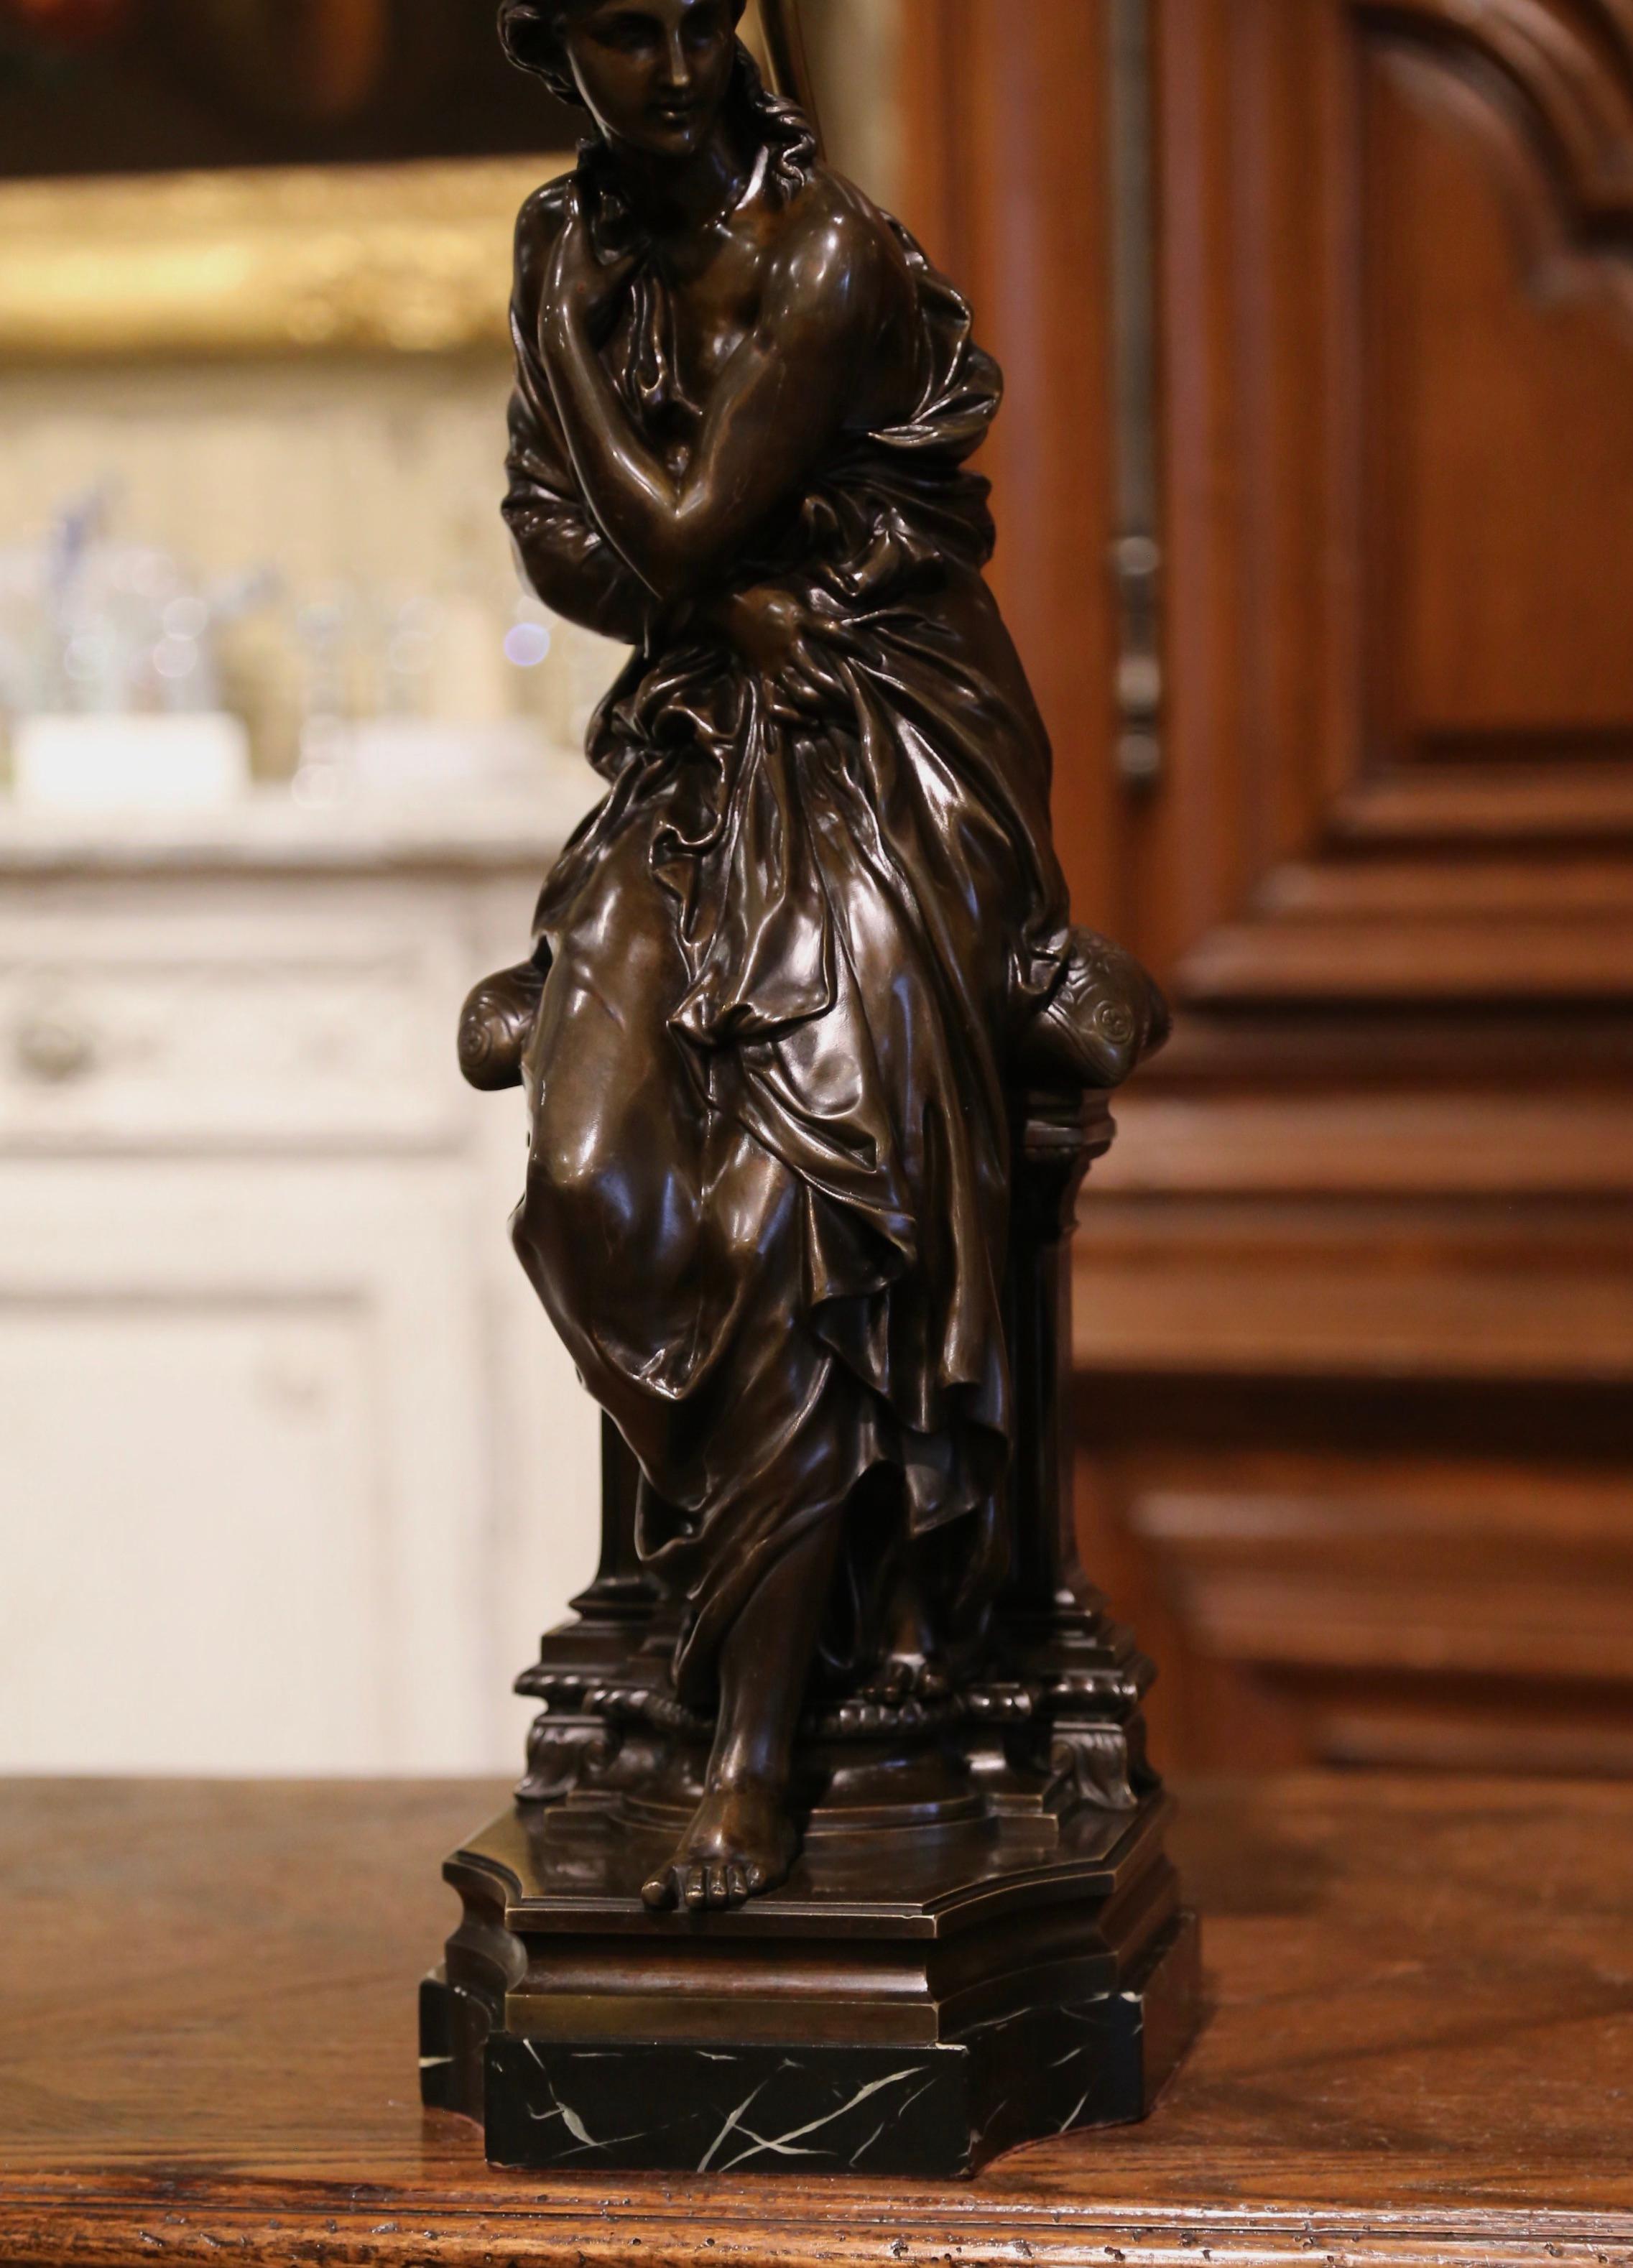 Neoclassical 19th Century French Bronze Figure Signed Dumaige Mounted into Table Lamp